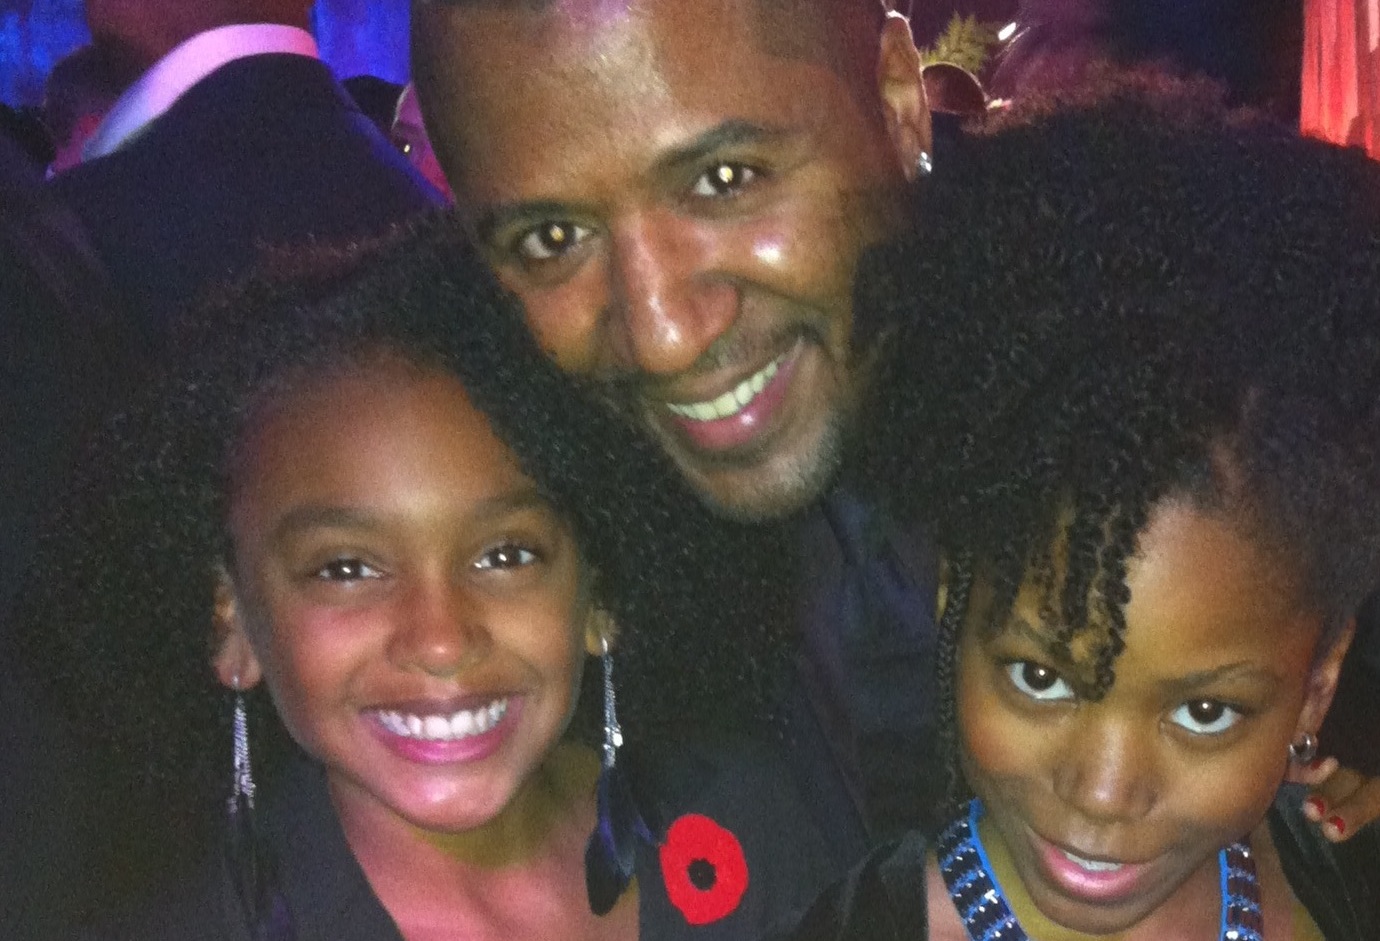 'The Best Man Holiday' Hollywood Premiere. Shailyn Pierre-Dixon (Left) with Director Malcolm D. Lee and Riele Downs (Right).